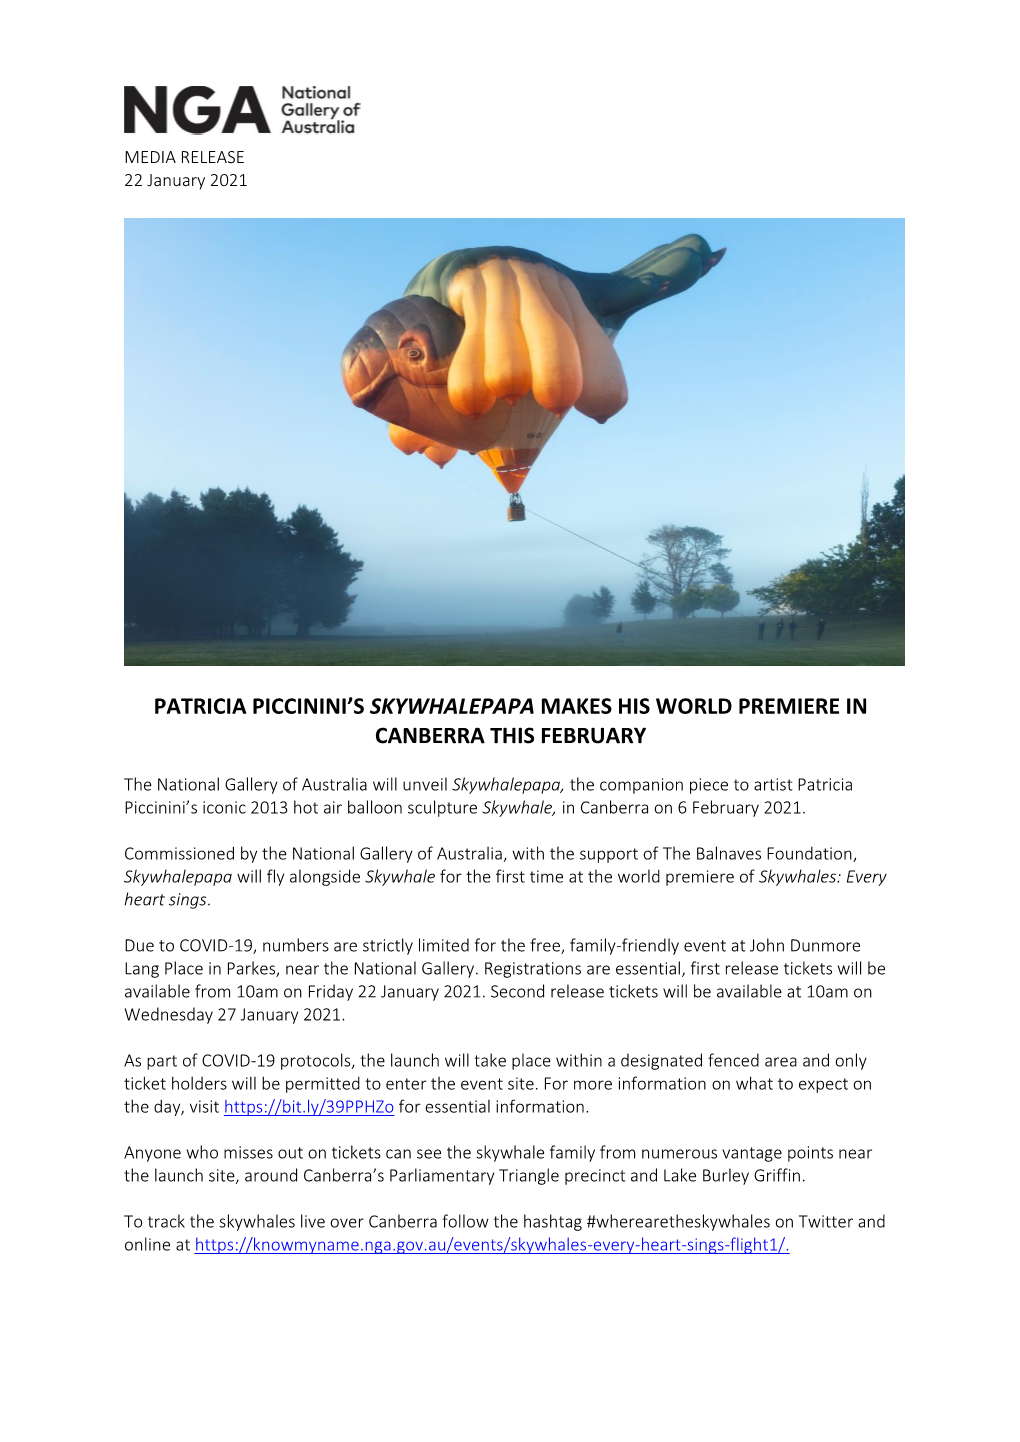 Patricia Piccinini's Skywhalepapa to Take Maiden Flight Over Canberra In